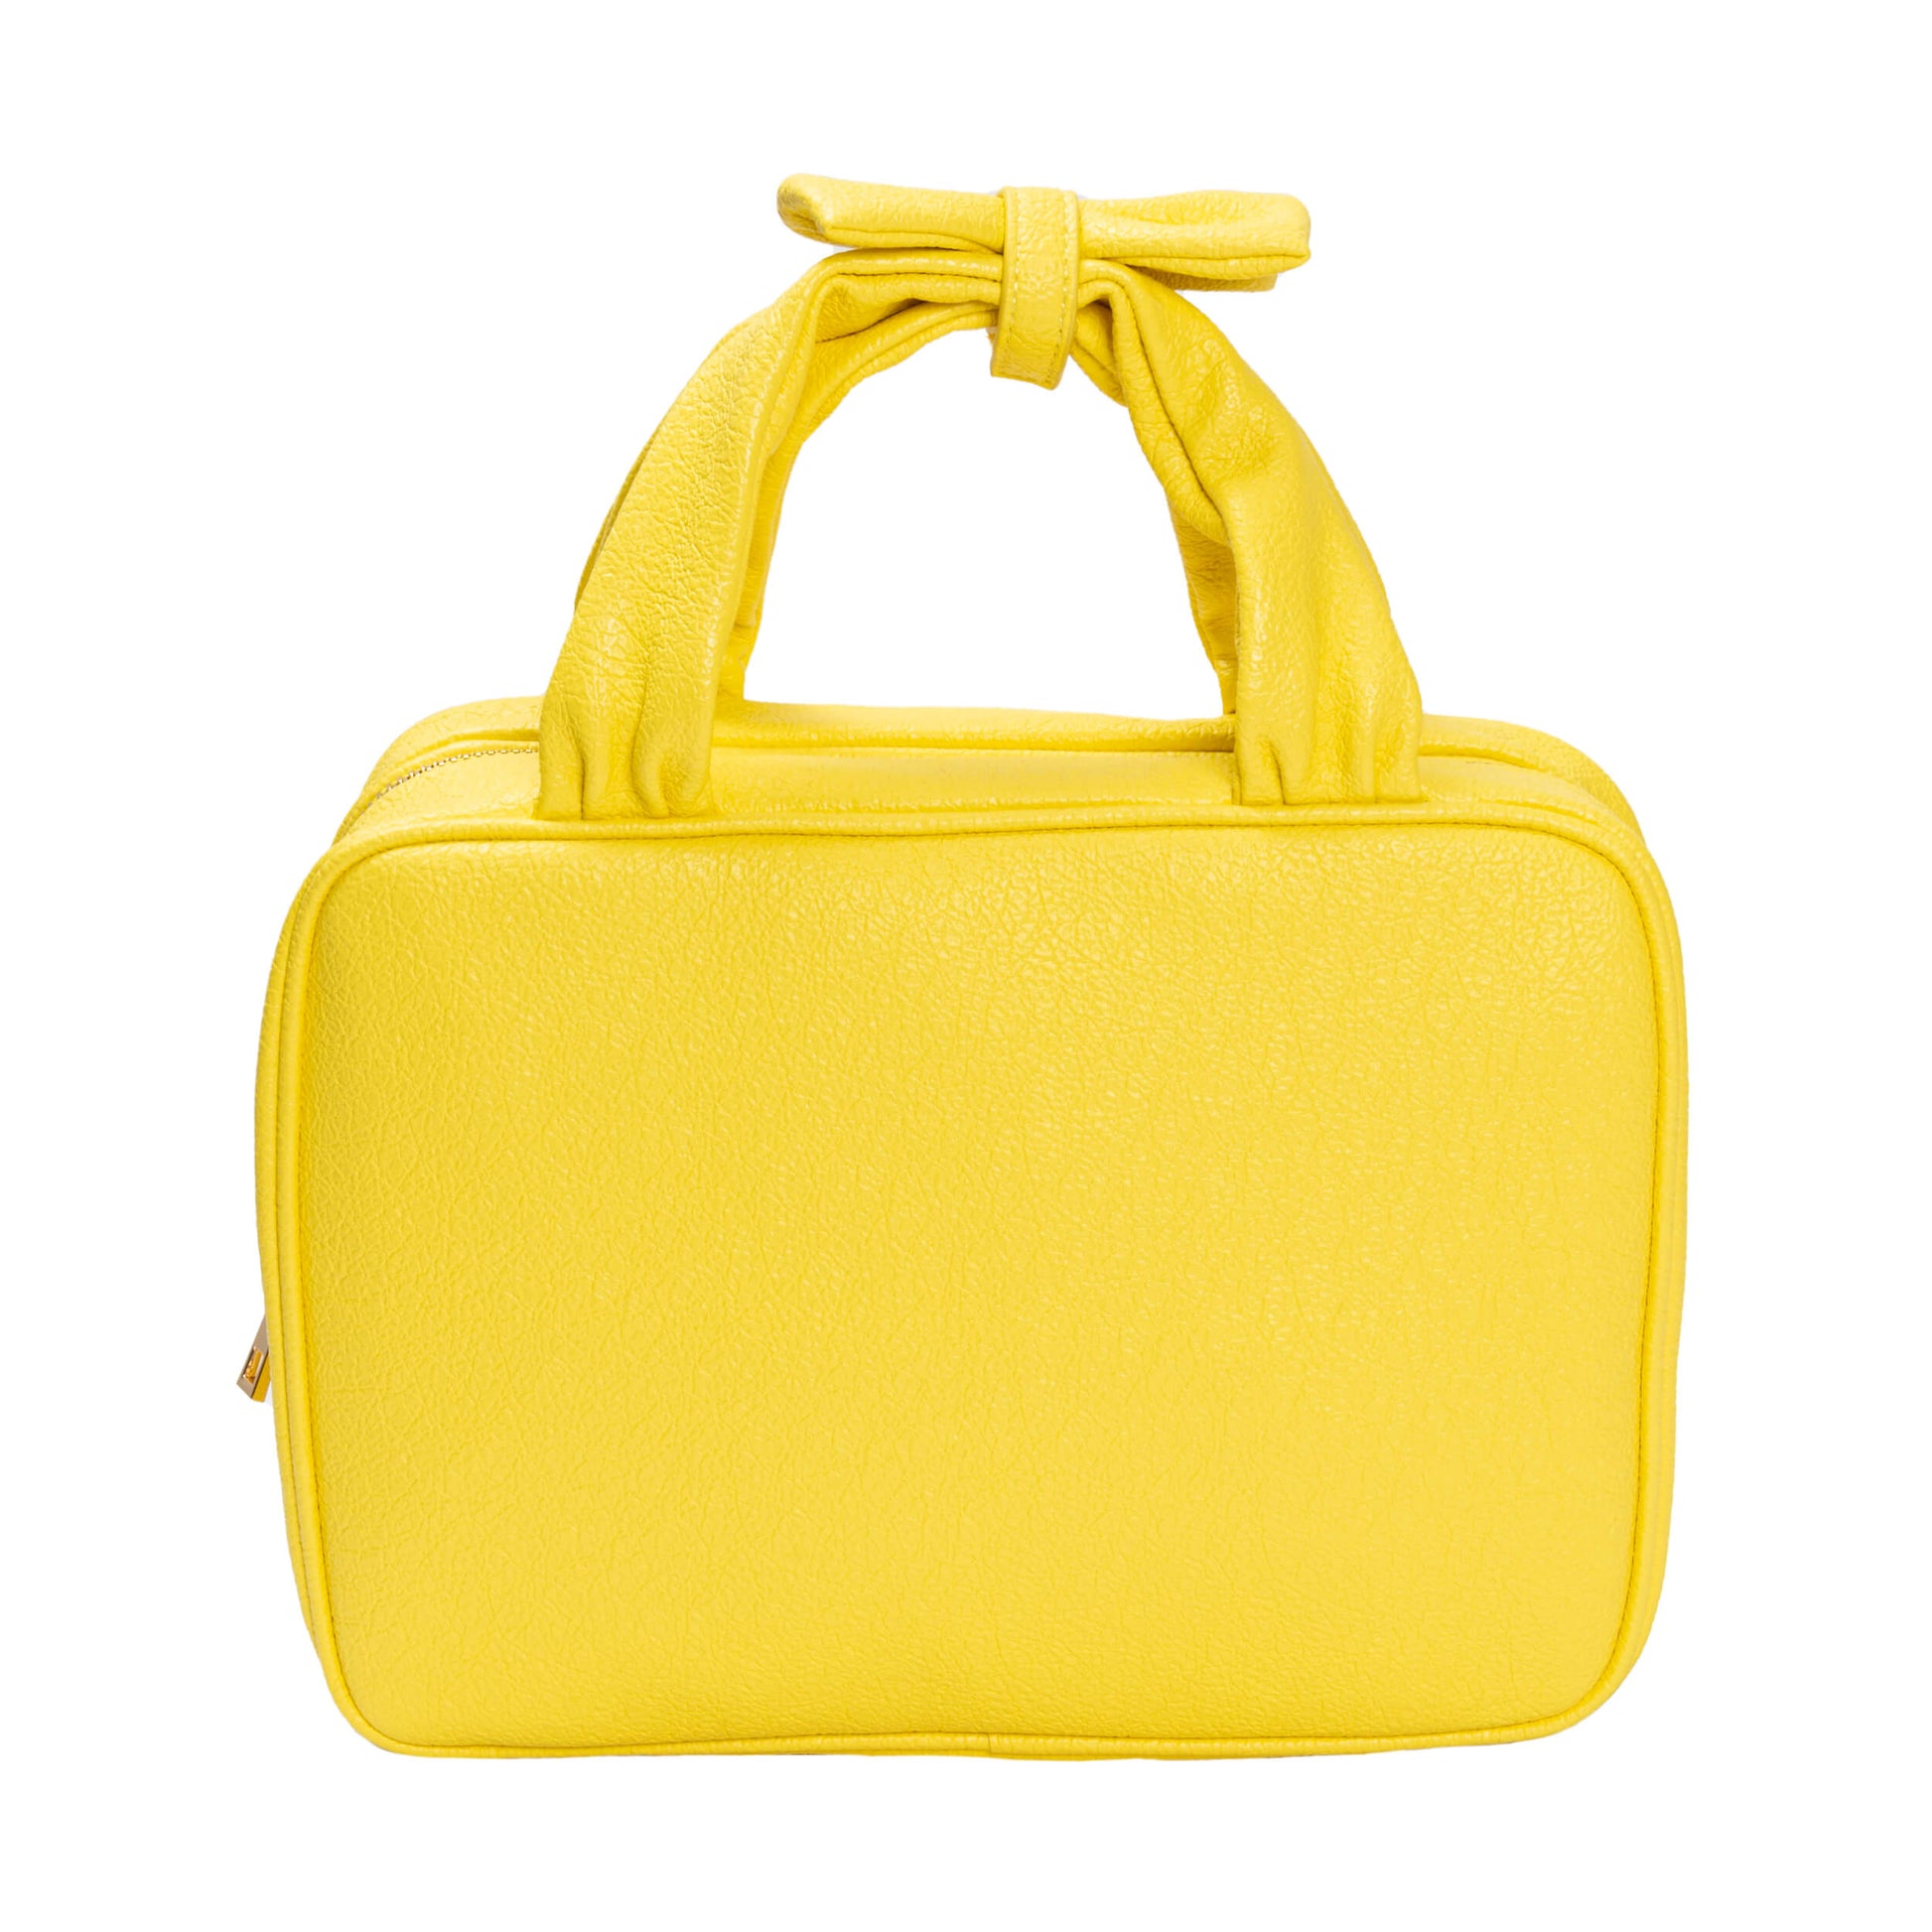 The Leah suitcase - Bright Yellow (Customizable)